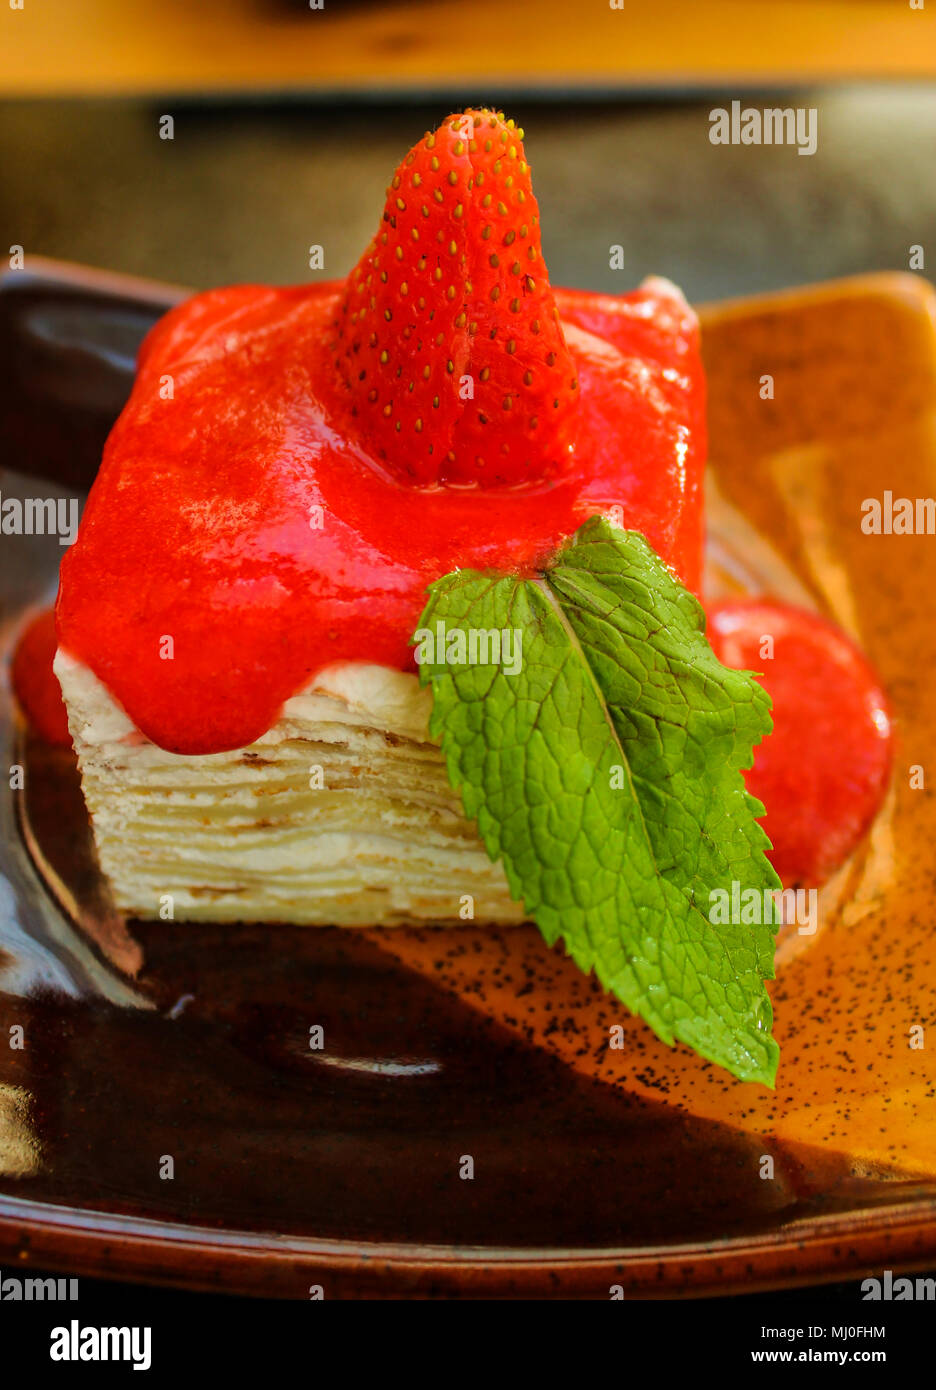 Sweet strawberry dessert, decorated with mint leaf on a square ceramic plate Stock Photo